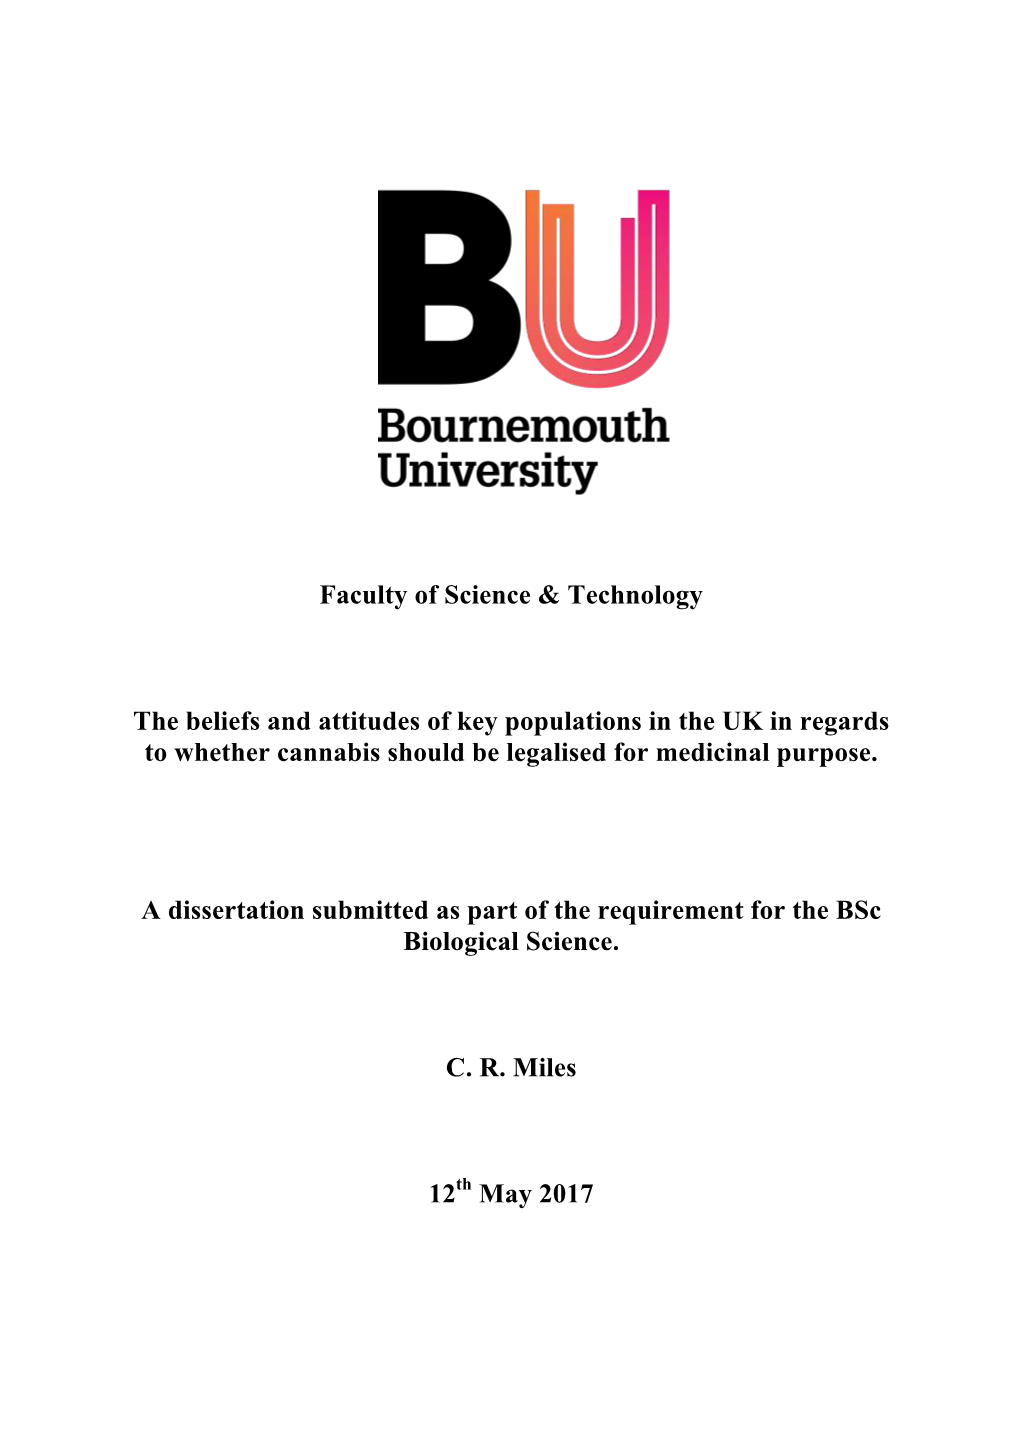 Dissertation Submitted As Part of the Requirement for the Bsc Biological Science